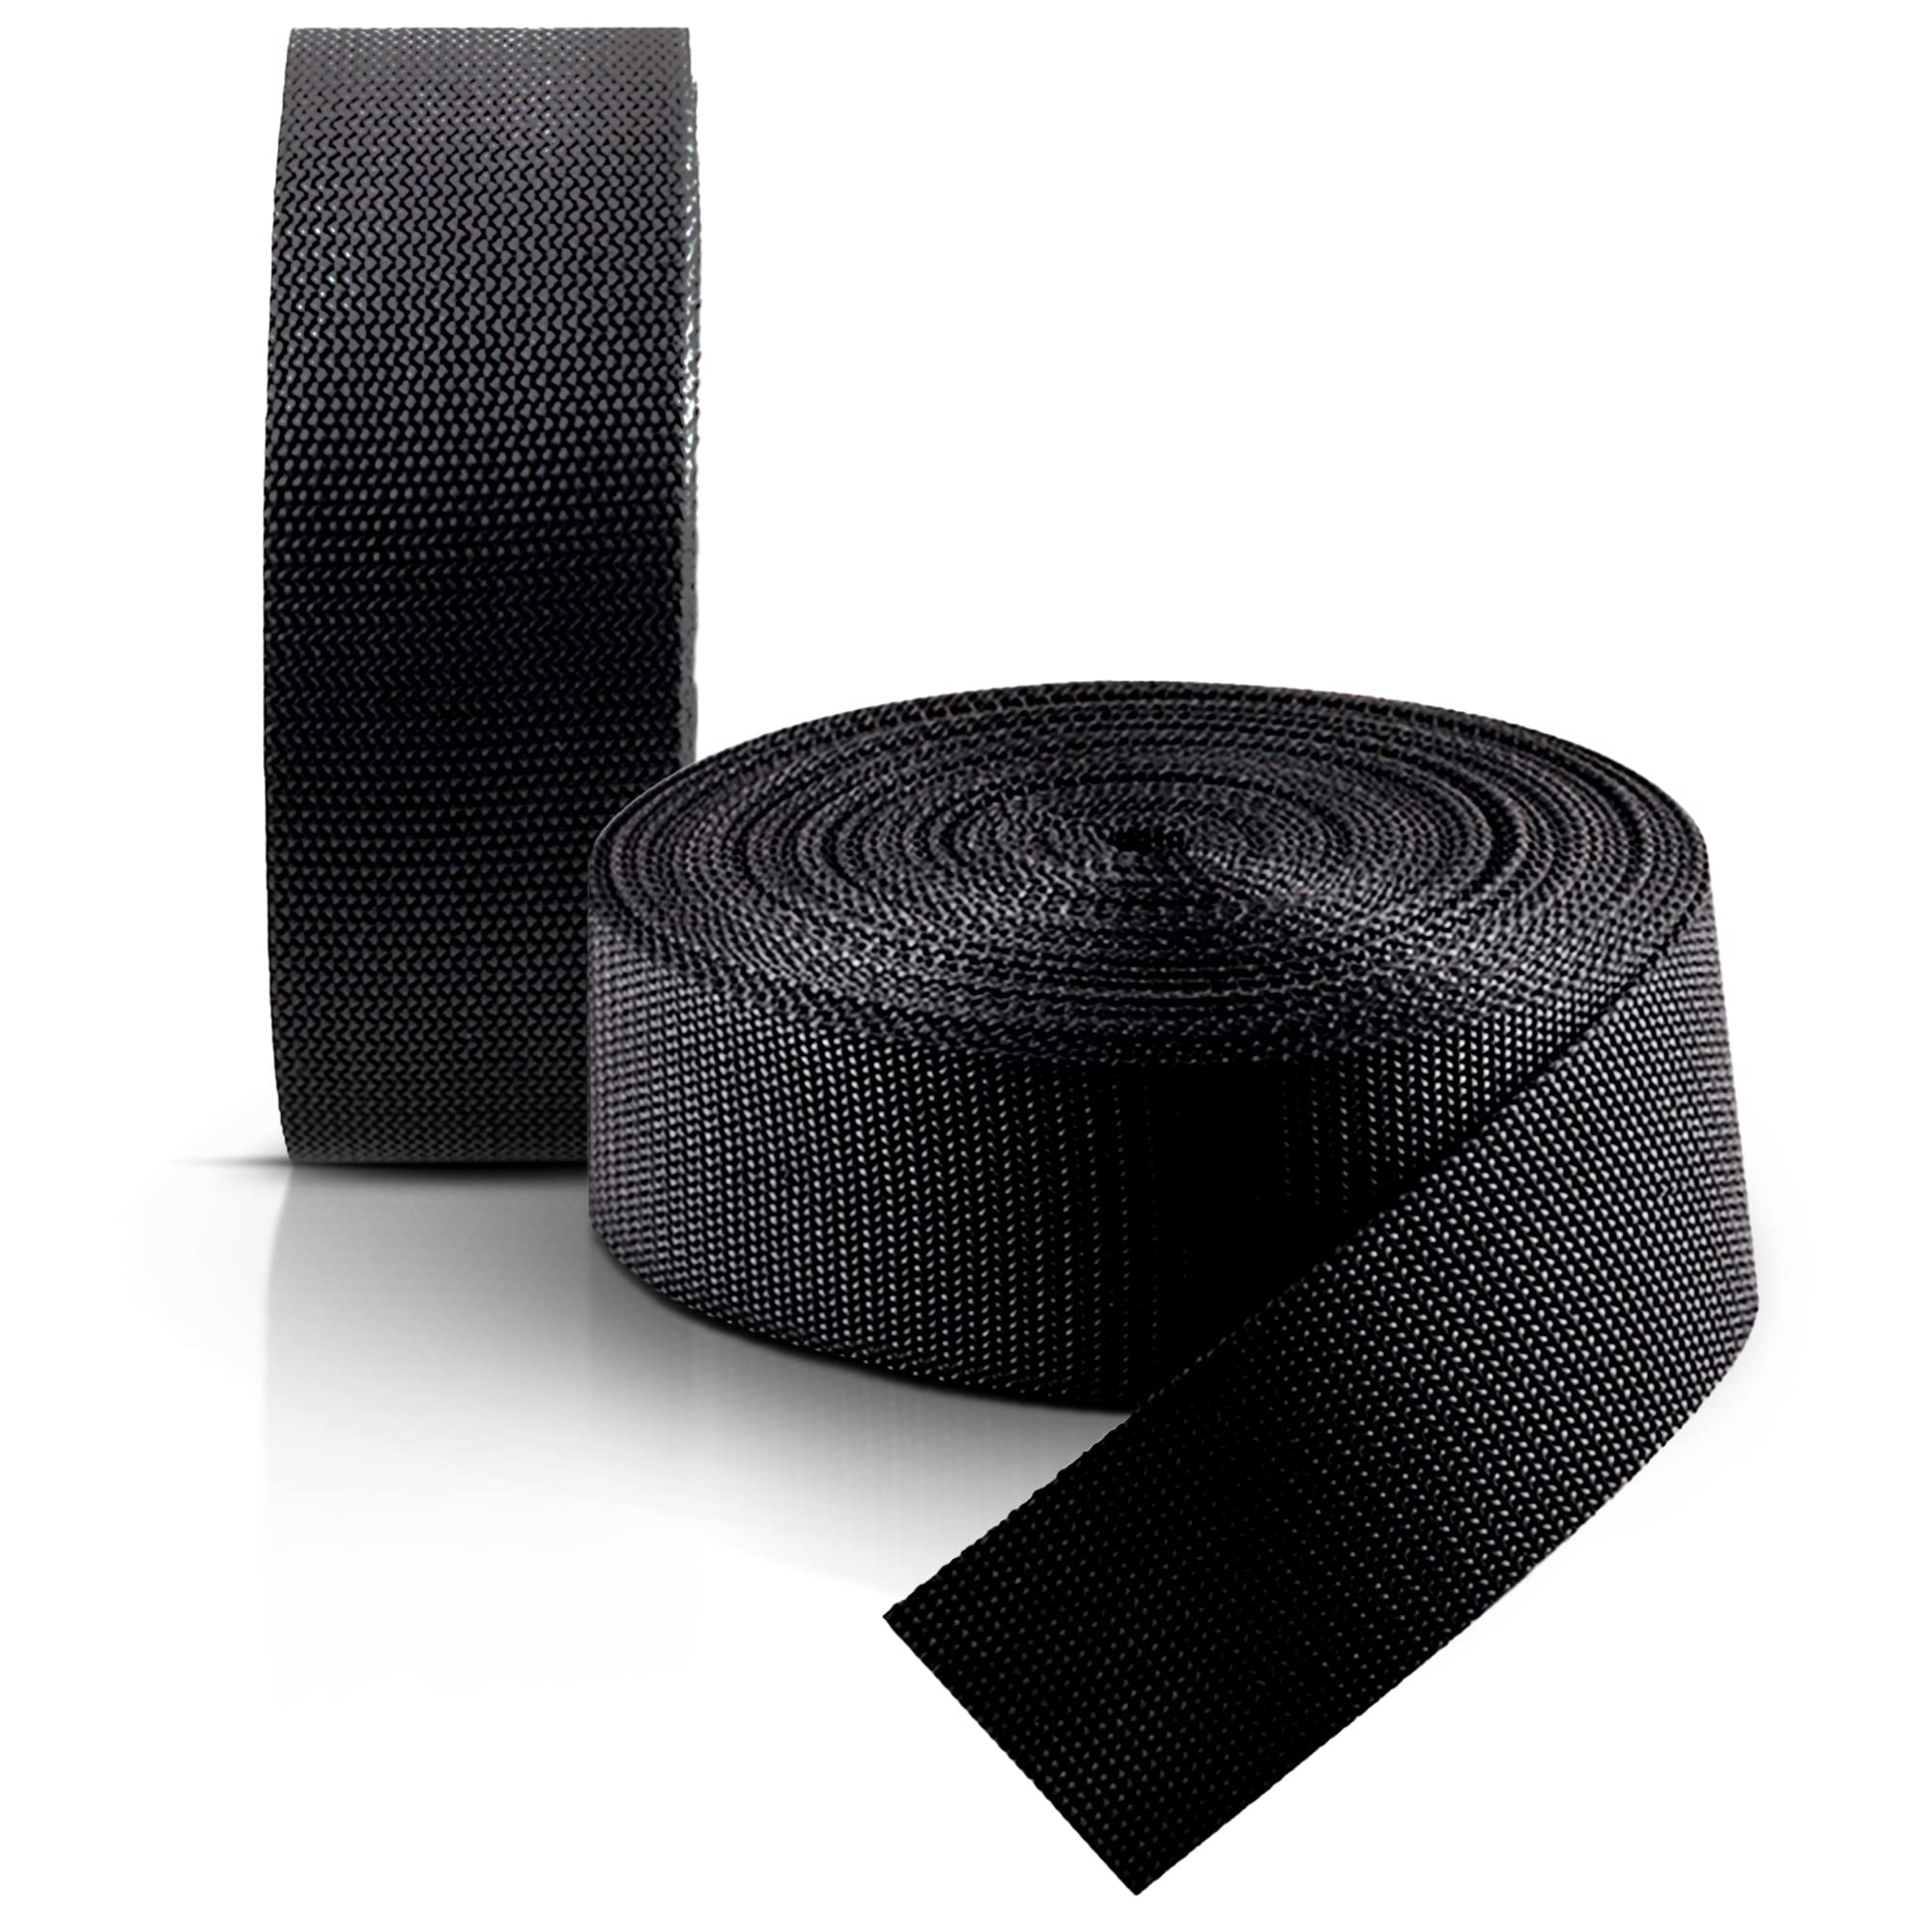 Woven Poly-elastic Webbing 2 Inch-wide Black Sold In By-The-Roll Quantities